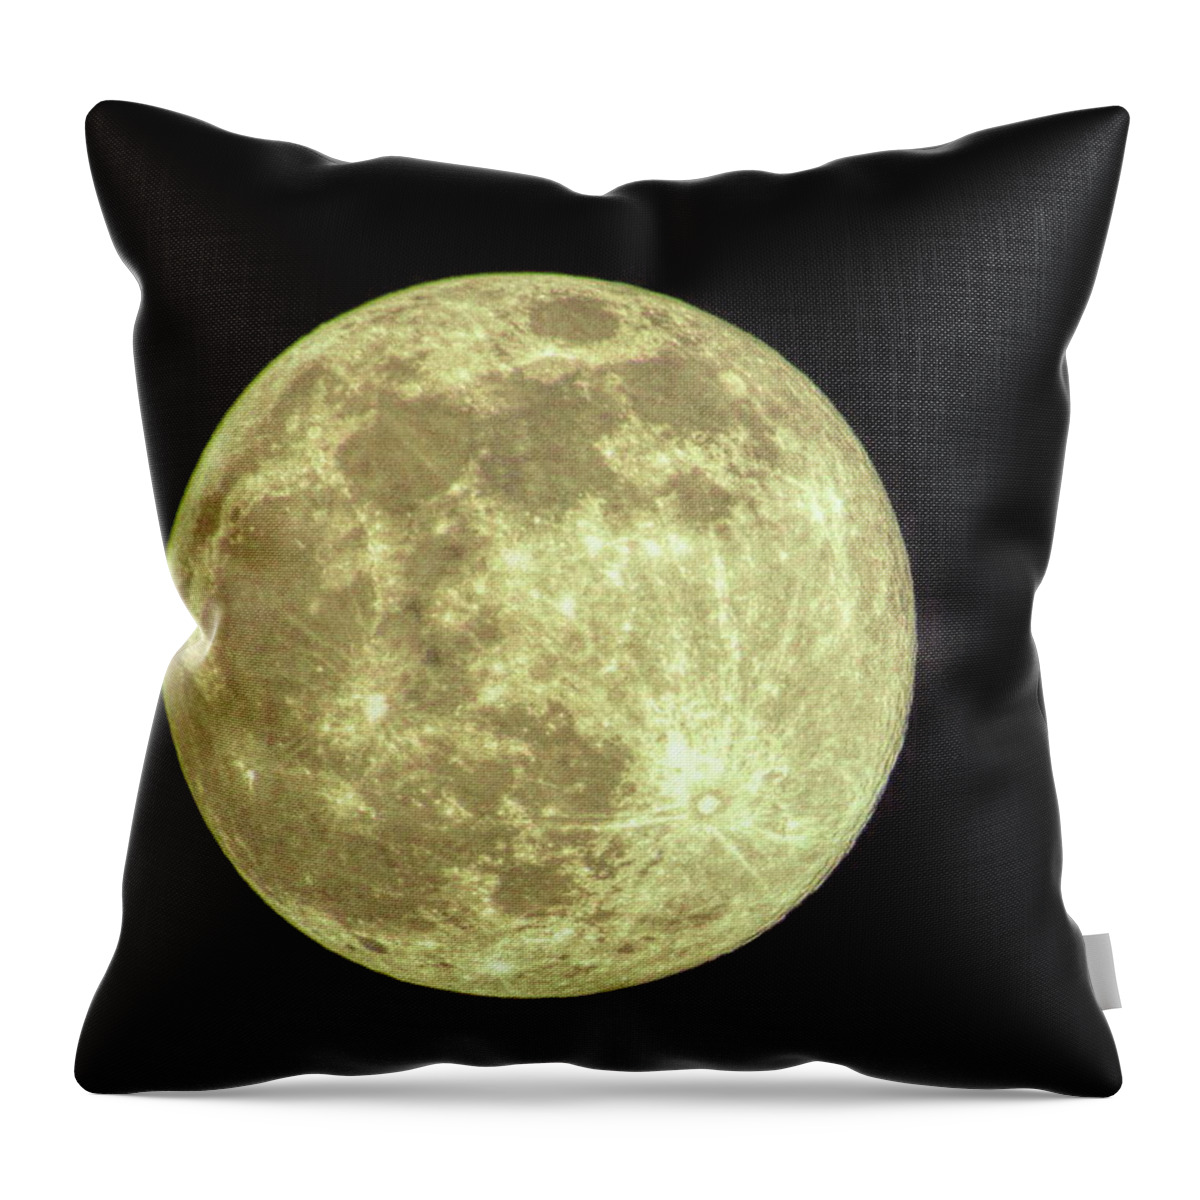 Home Throw Pillow featuring the photograph Super Moon - April 7, 2020 by Jeff Iverson